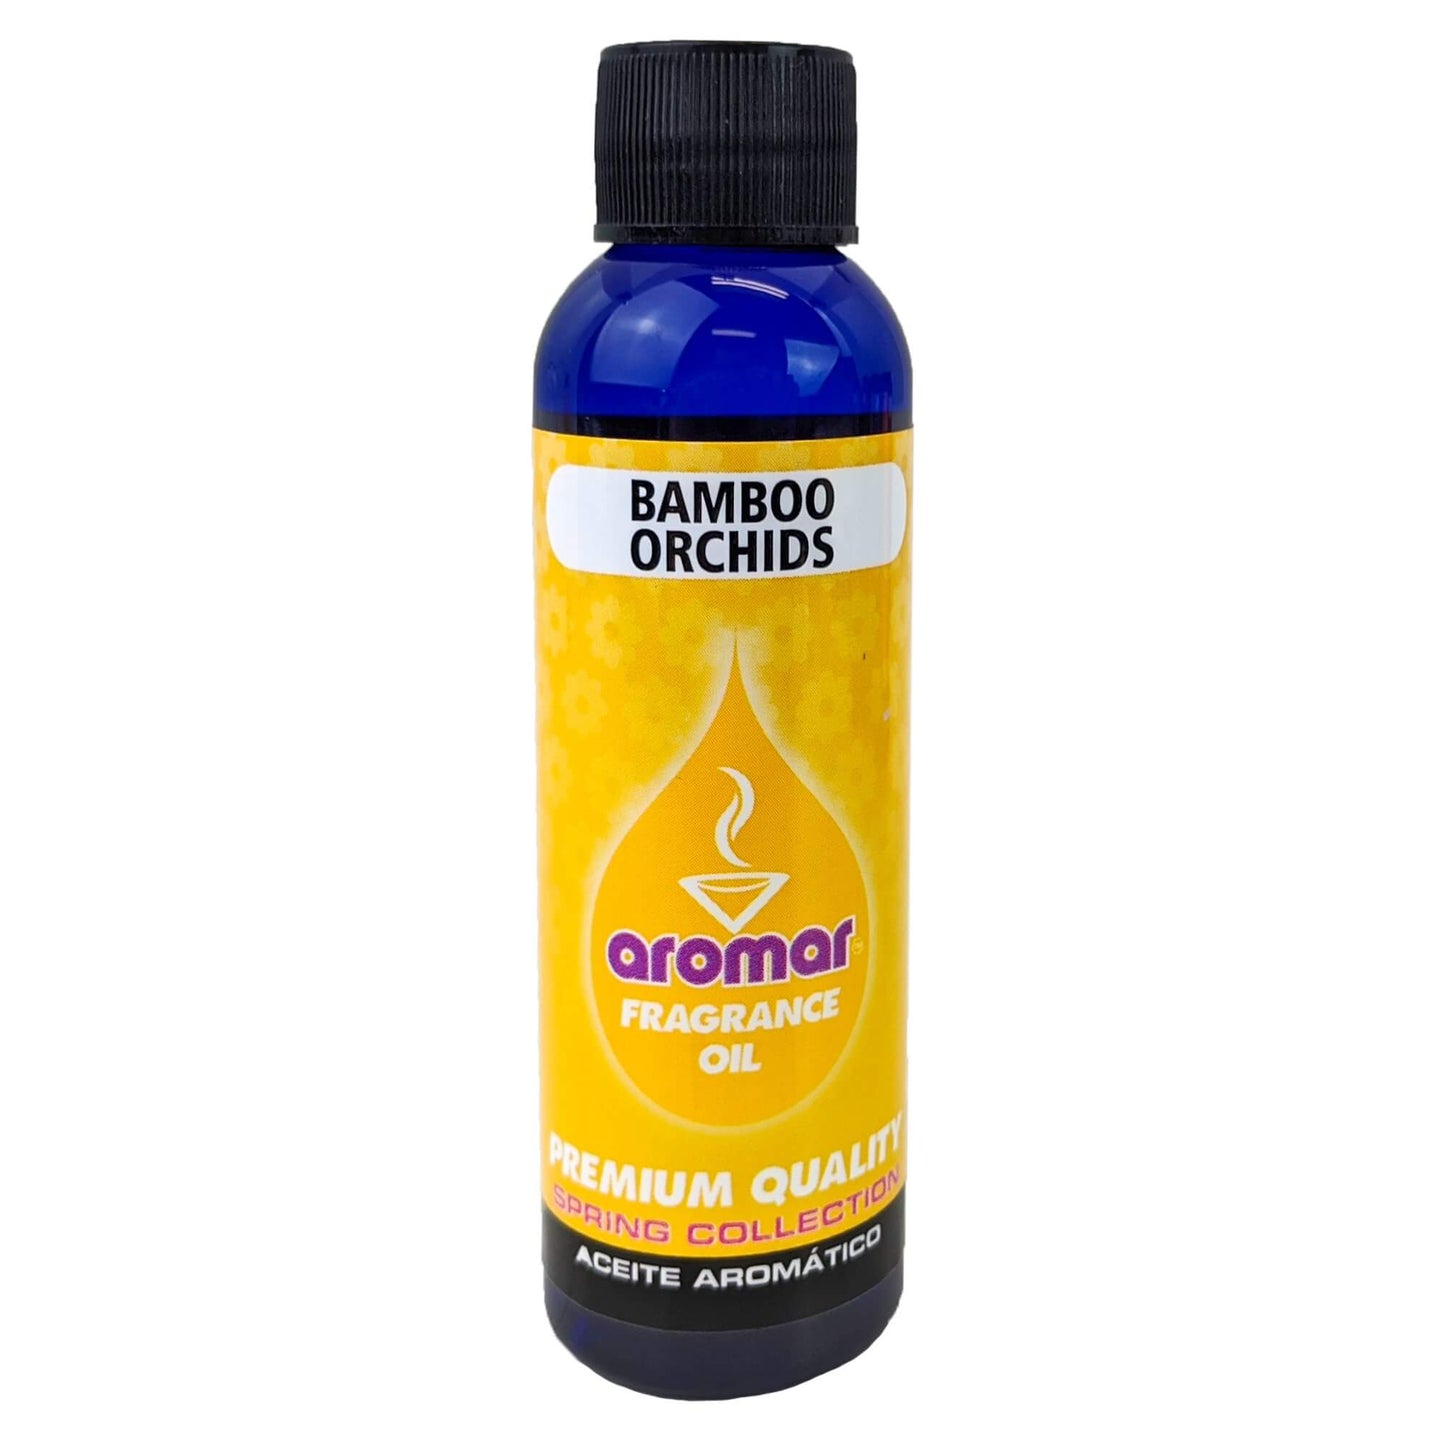 Bamboo Orchids Scent Aromar Fragrance Oil, 2oz/60ml